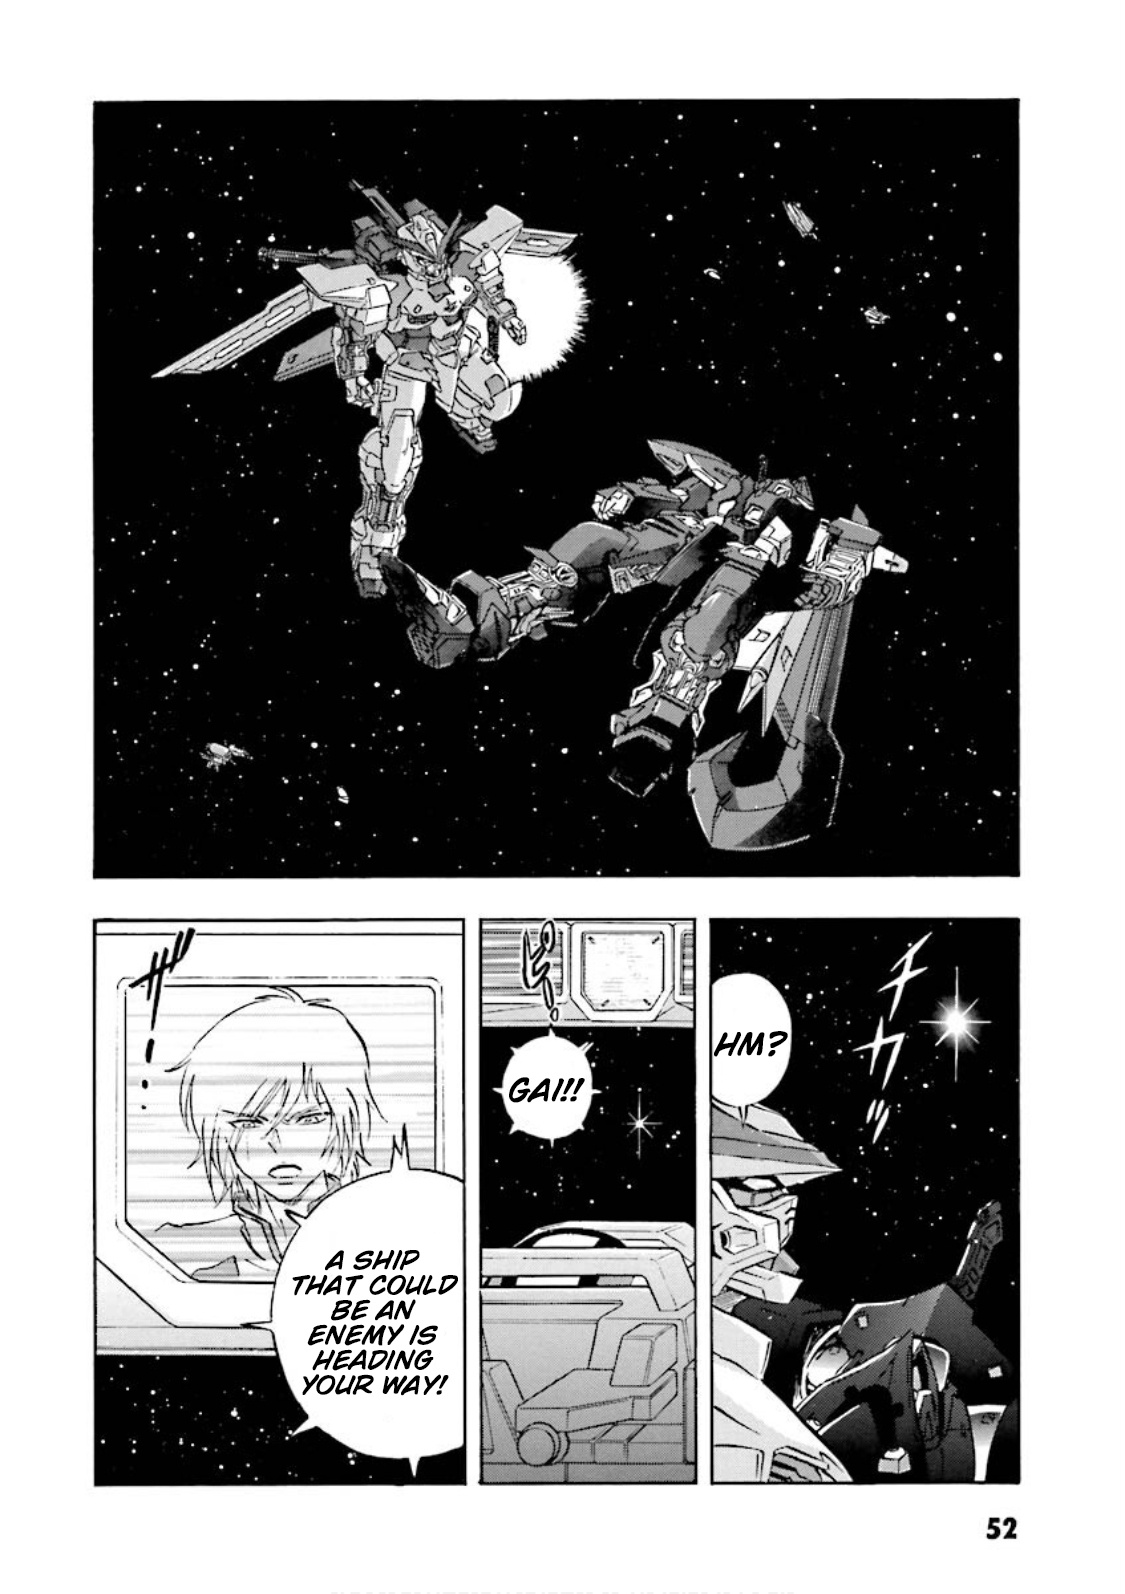 Mobile Suit Gundam Seed Astray Re:master Edition Vol.4 Chapter 16: The Explorer - Picture 2